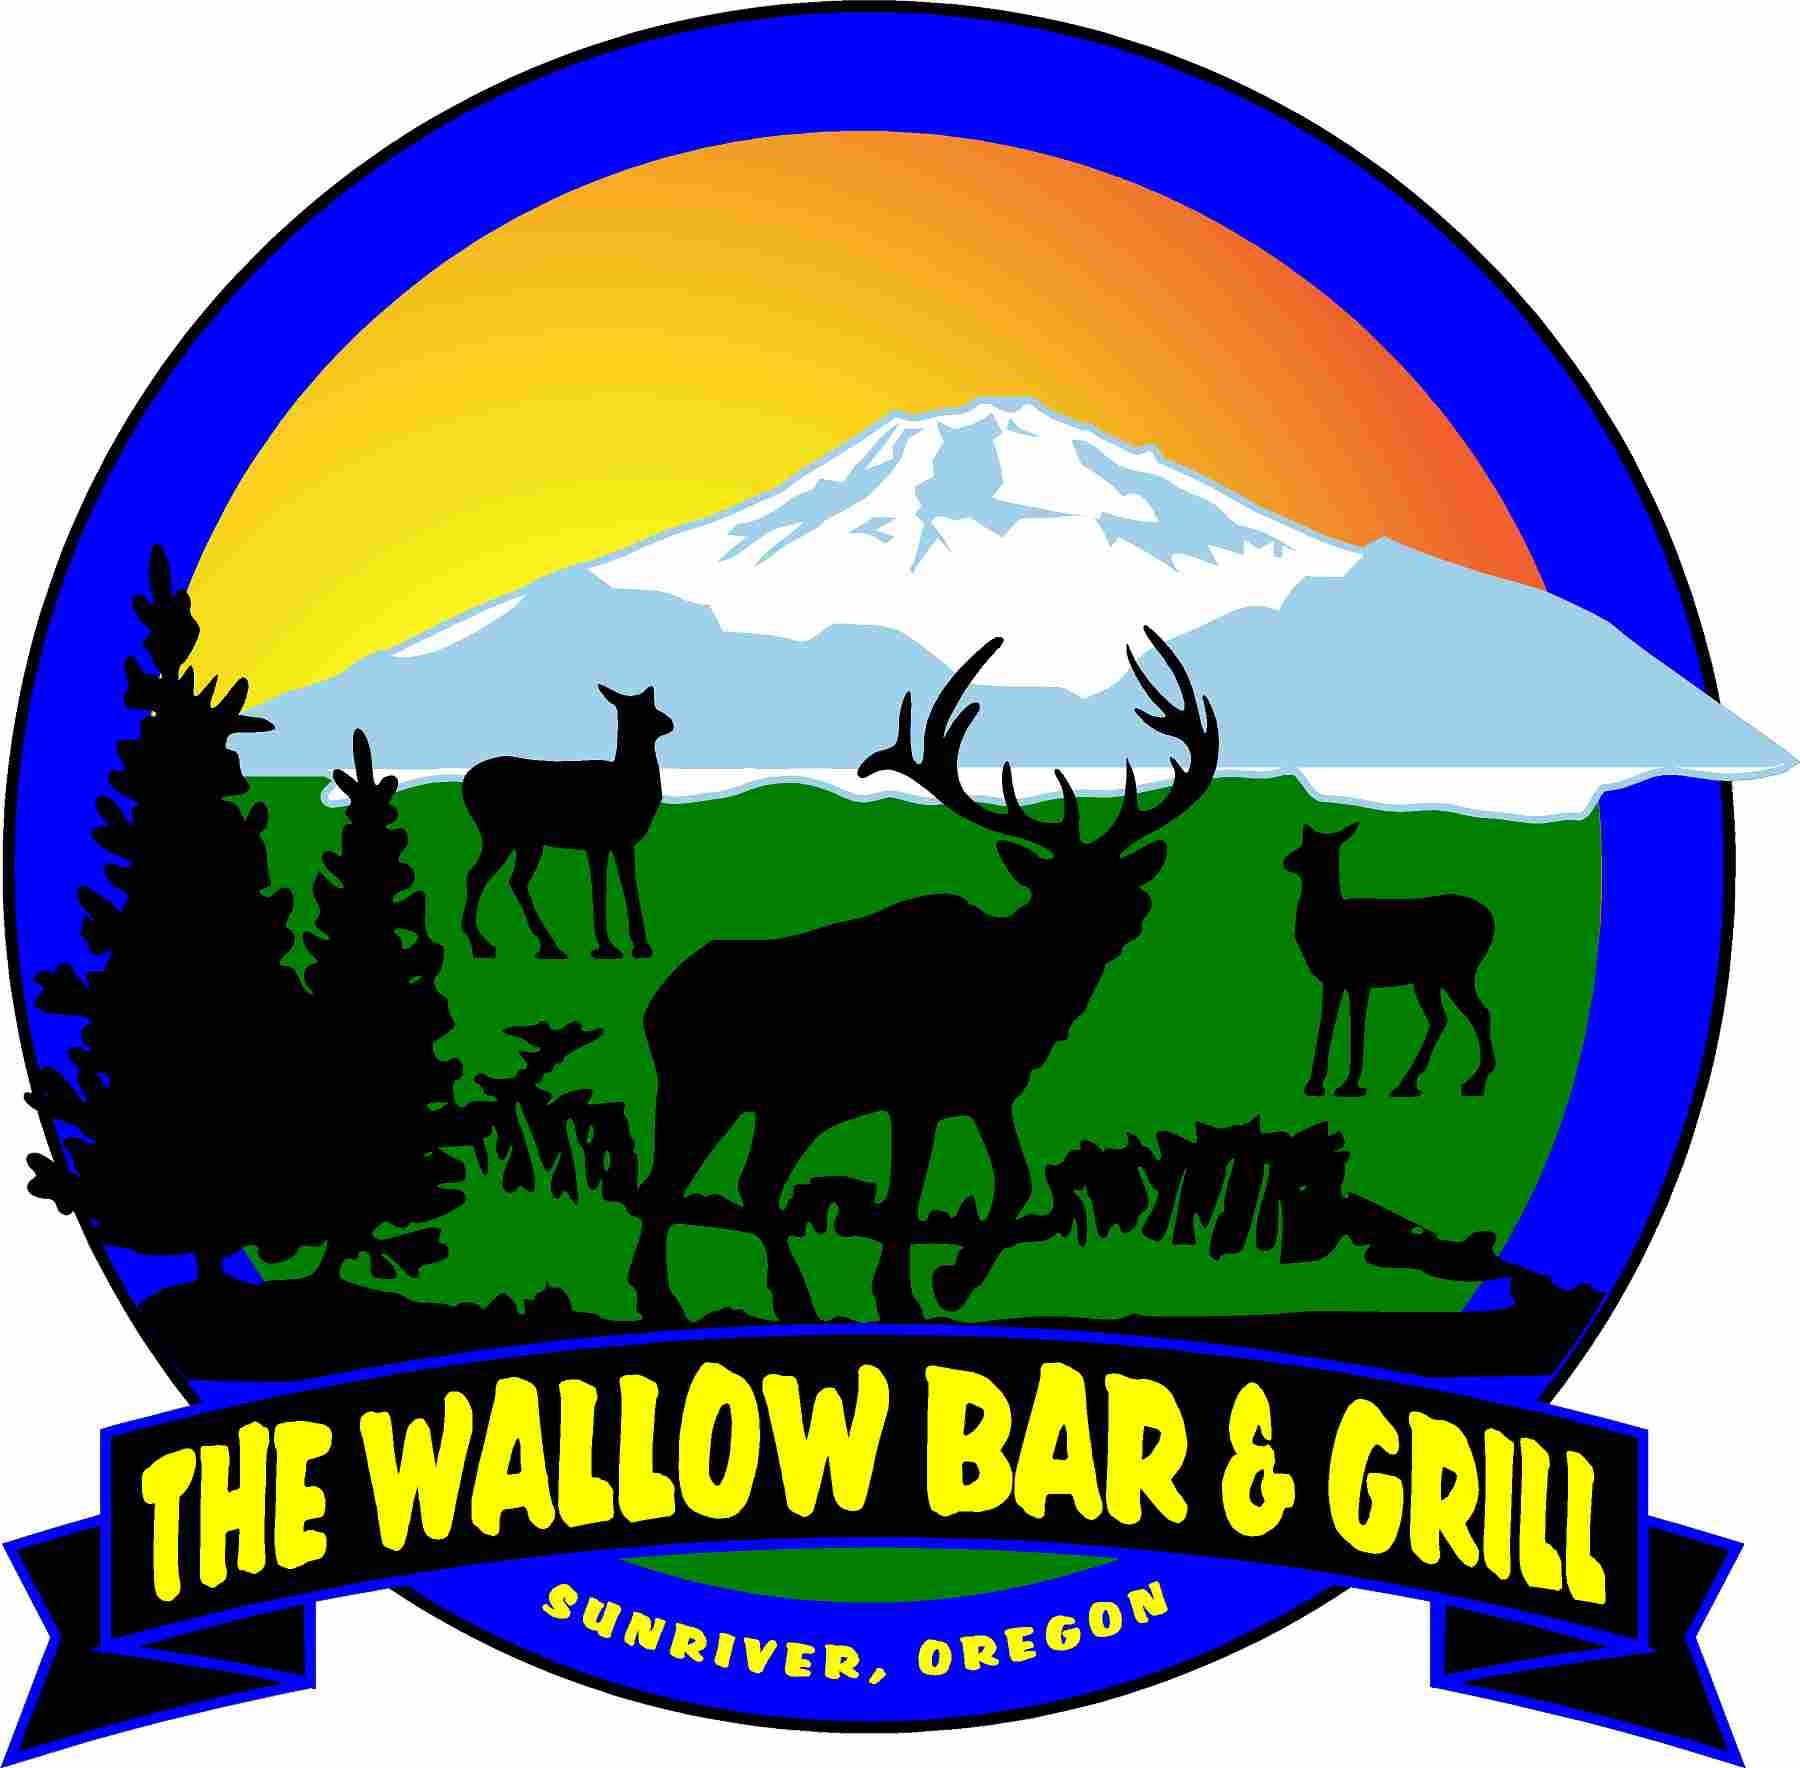 The Wallow Bar & Grill